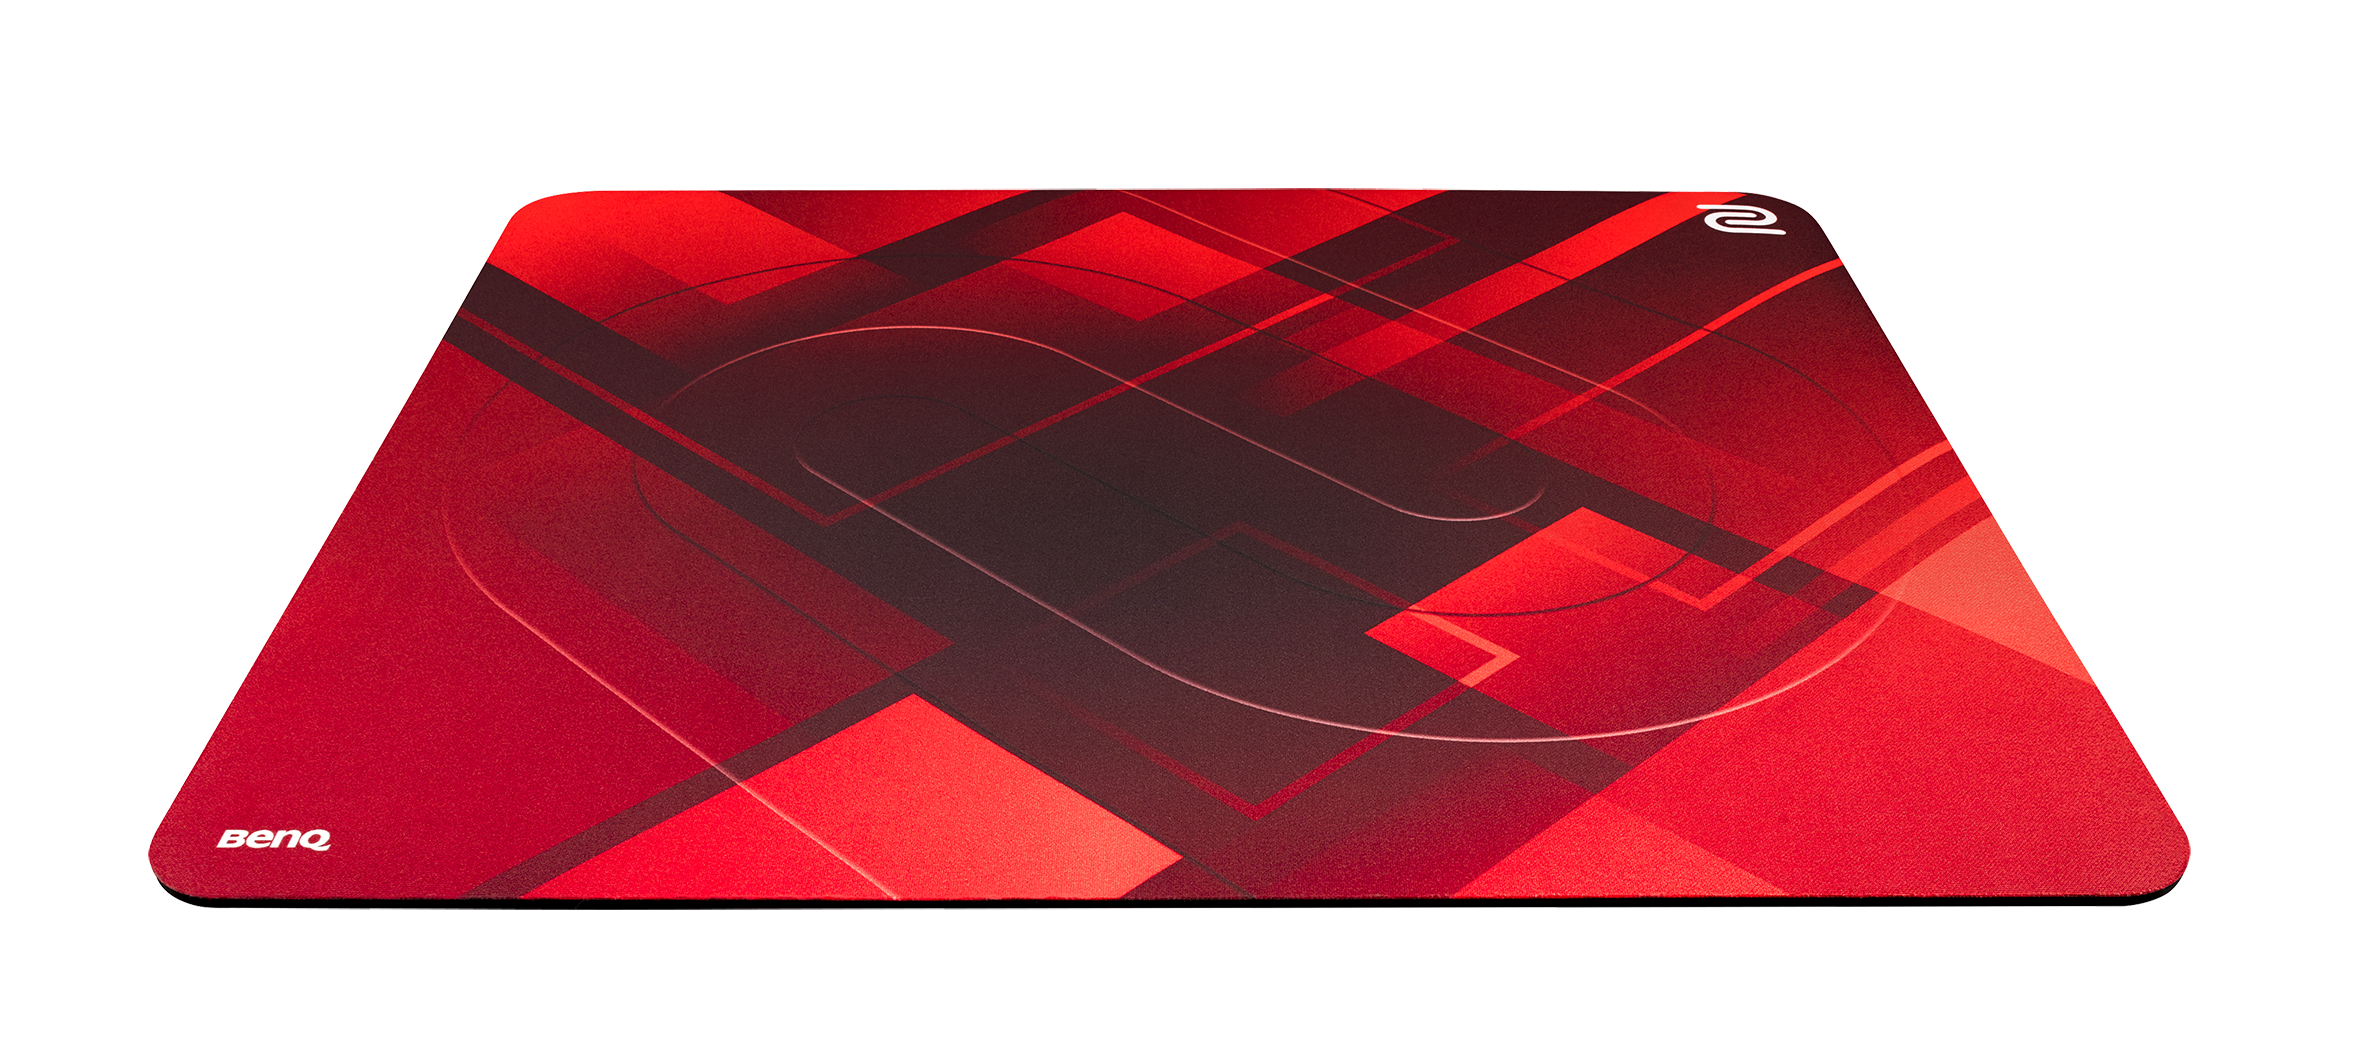 Benq Asia Pacific Announces G Sr Se Red Esports Mousepads Is Now Available In Asia Pacific Regions